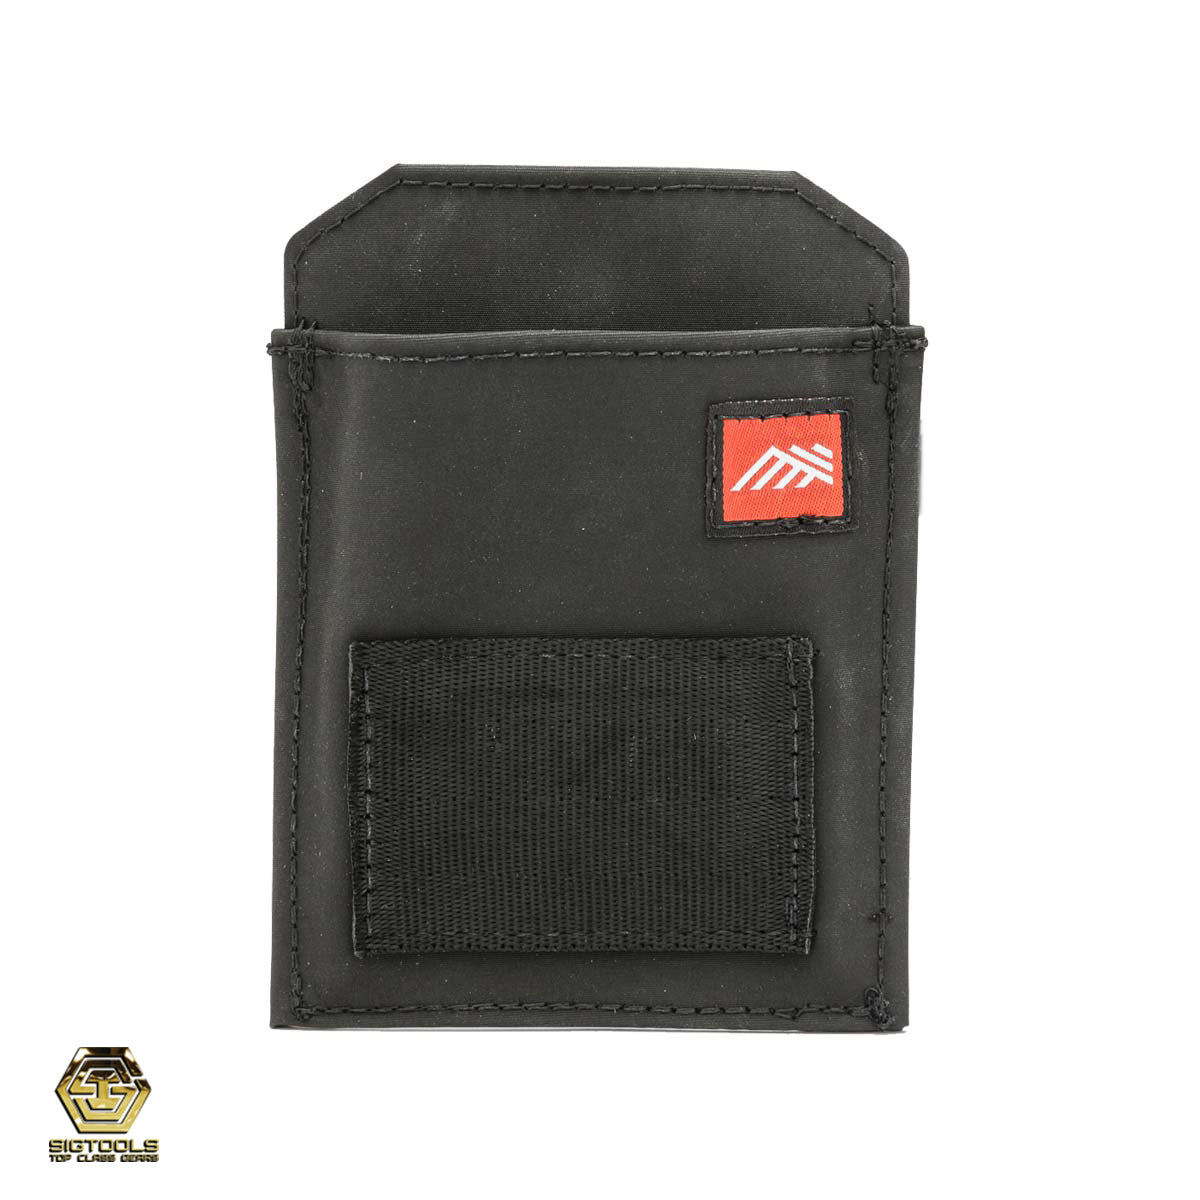 "Diamondback 715 Utility Pocket - Empty, Ready for Tools and Accessories"